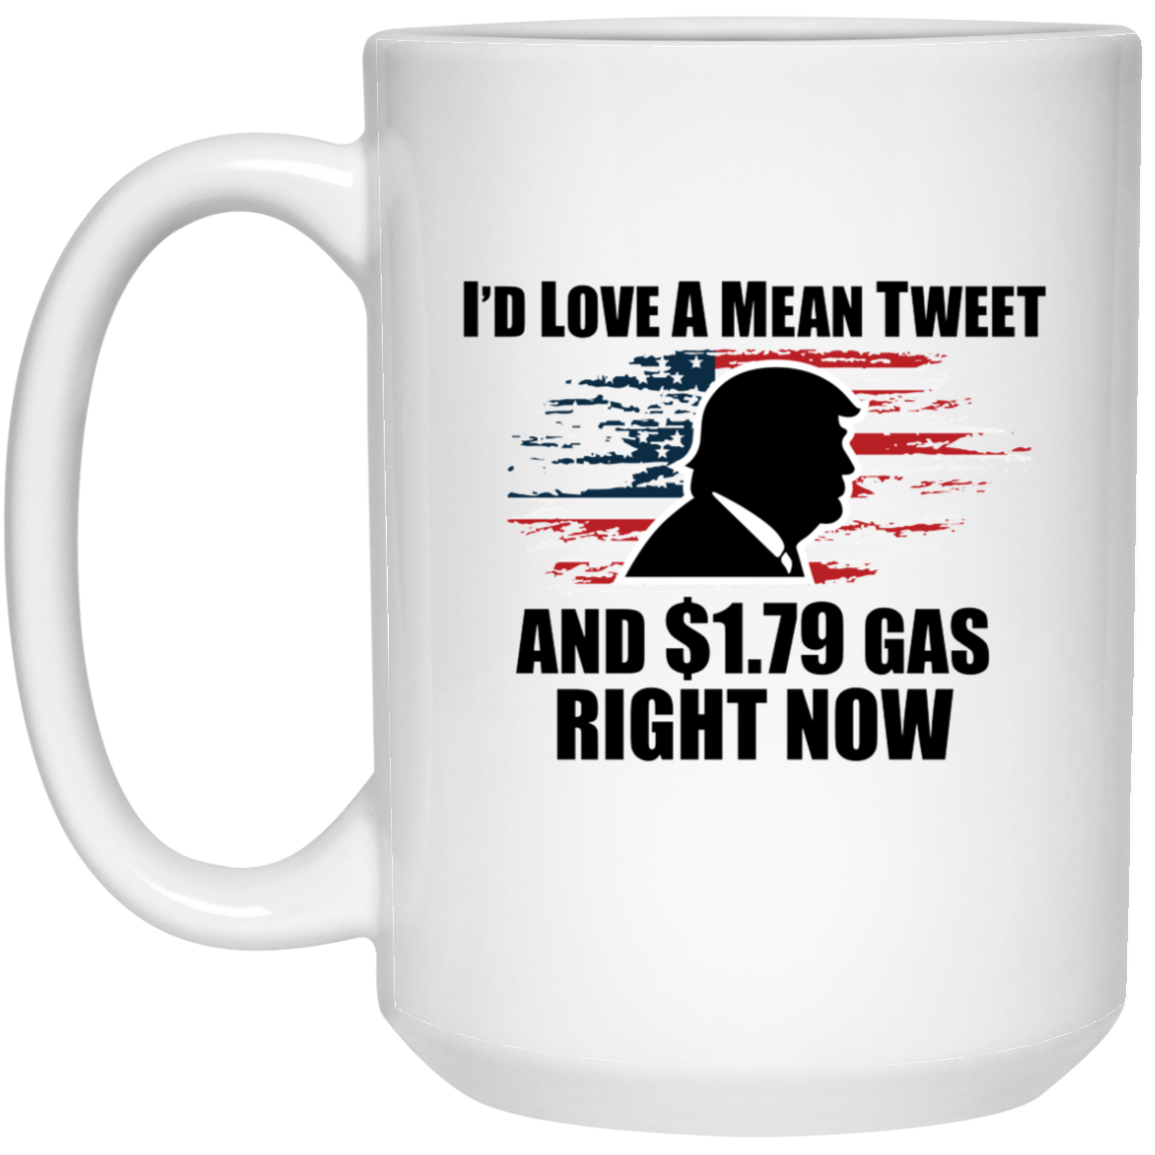 I'd Love A Mean Tweet and $1.79 Gas Right Now - MUGS